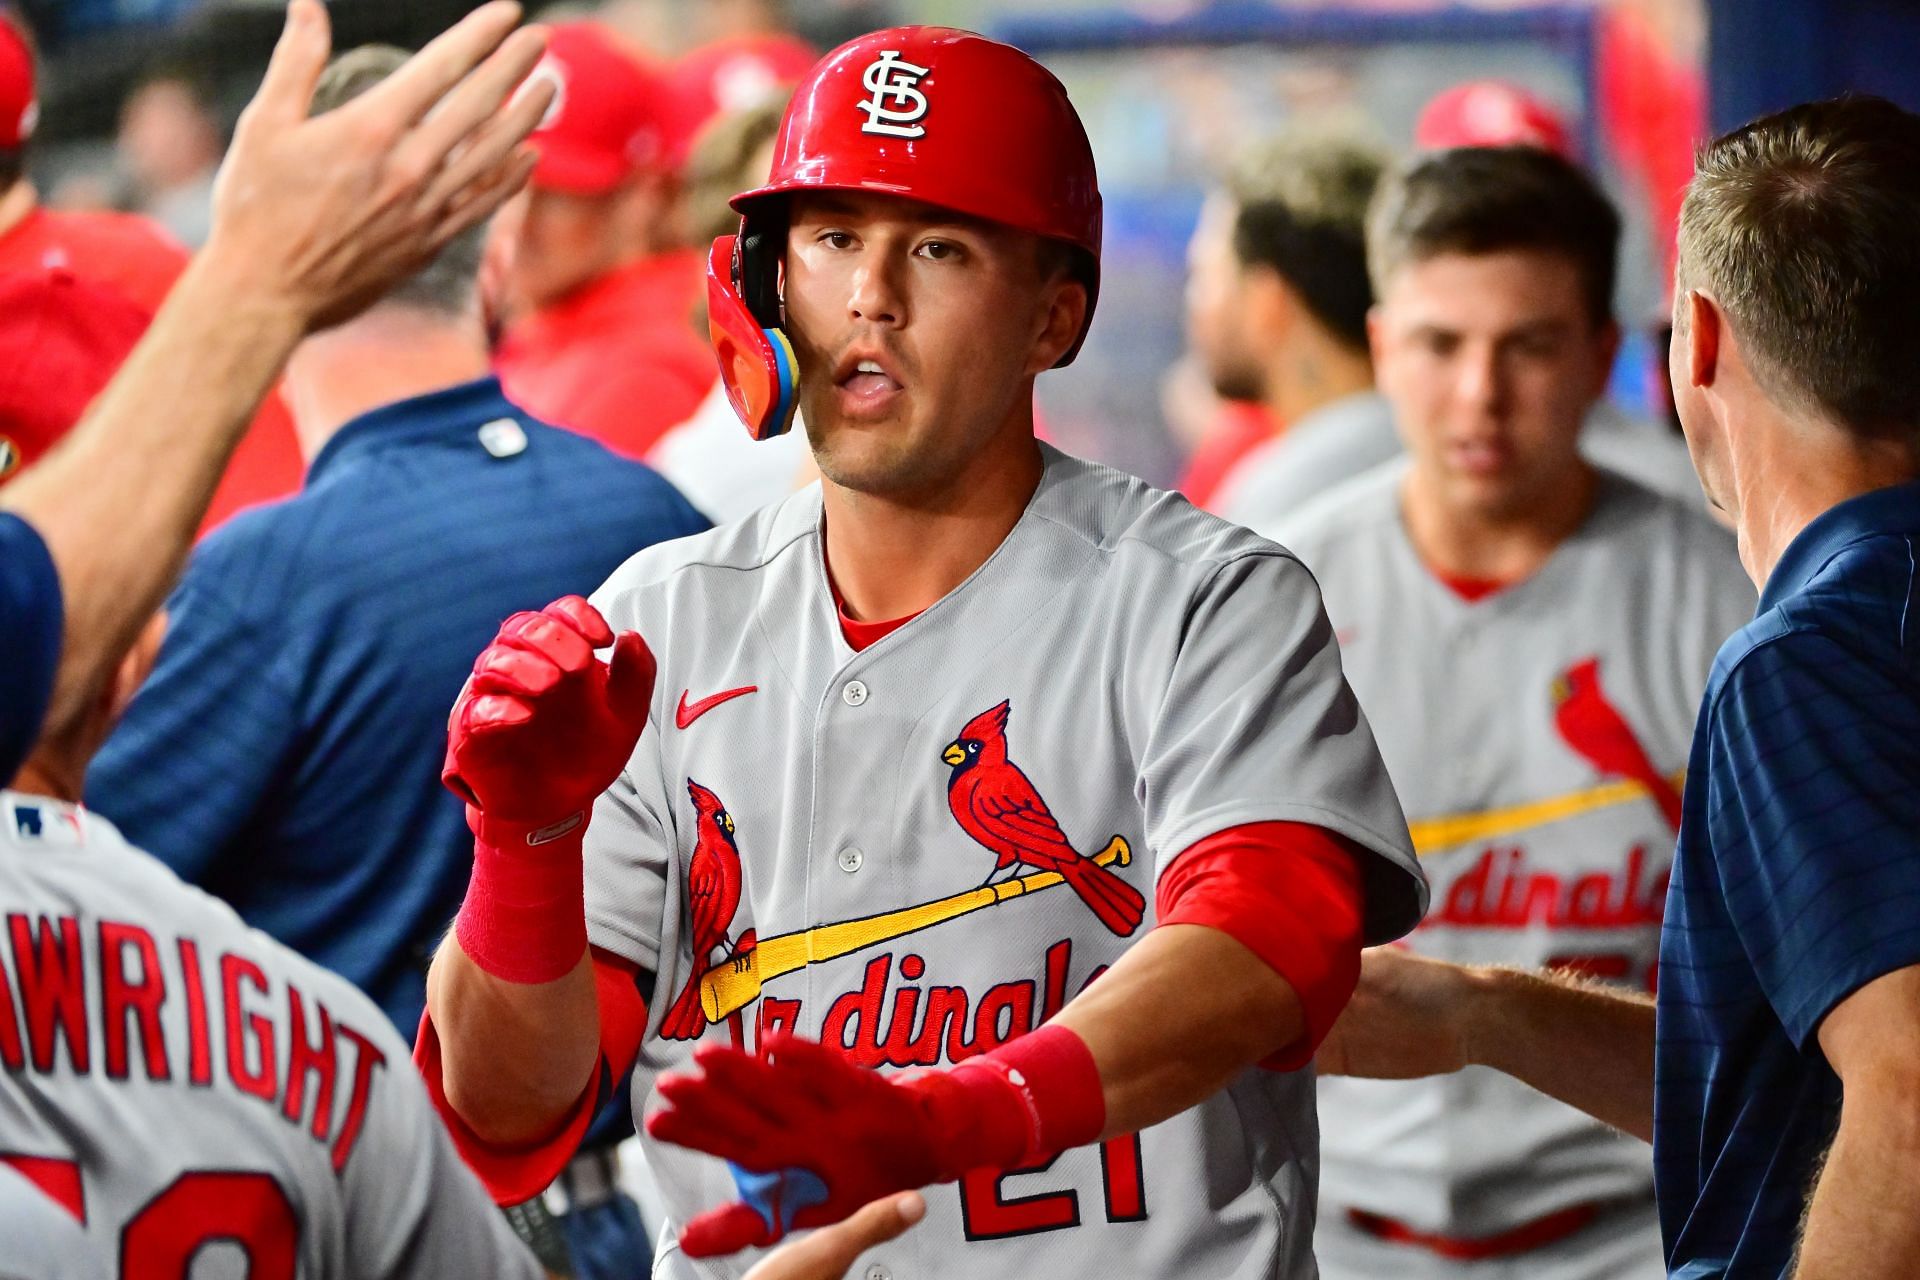 The St. Louis Cardinals hold a one game lead in the NL Central.